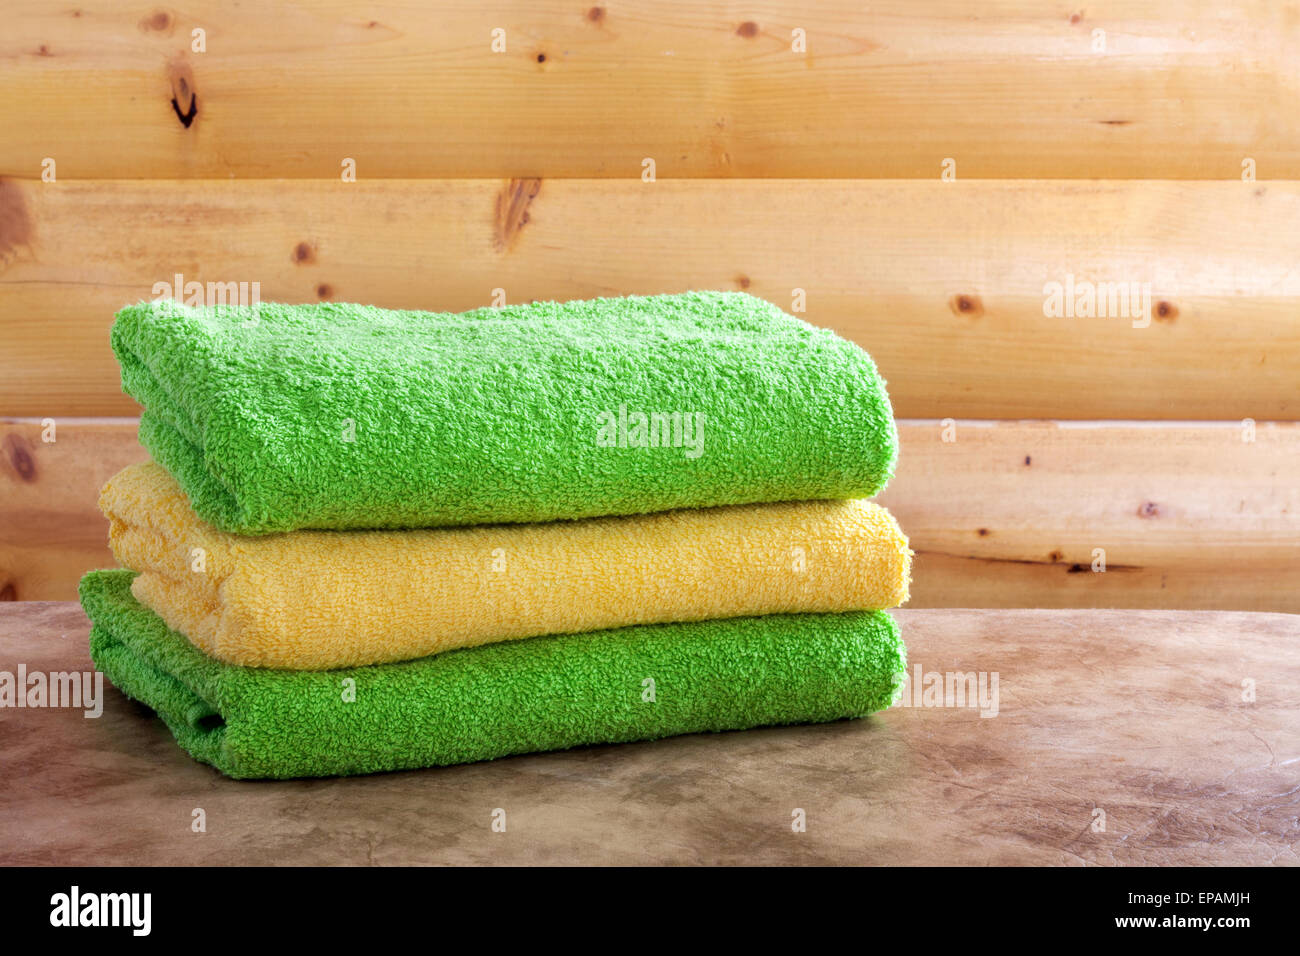 Traditional wooden sauna for relaxation with set of clean towels Stock Photo